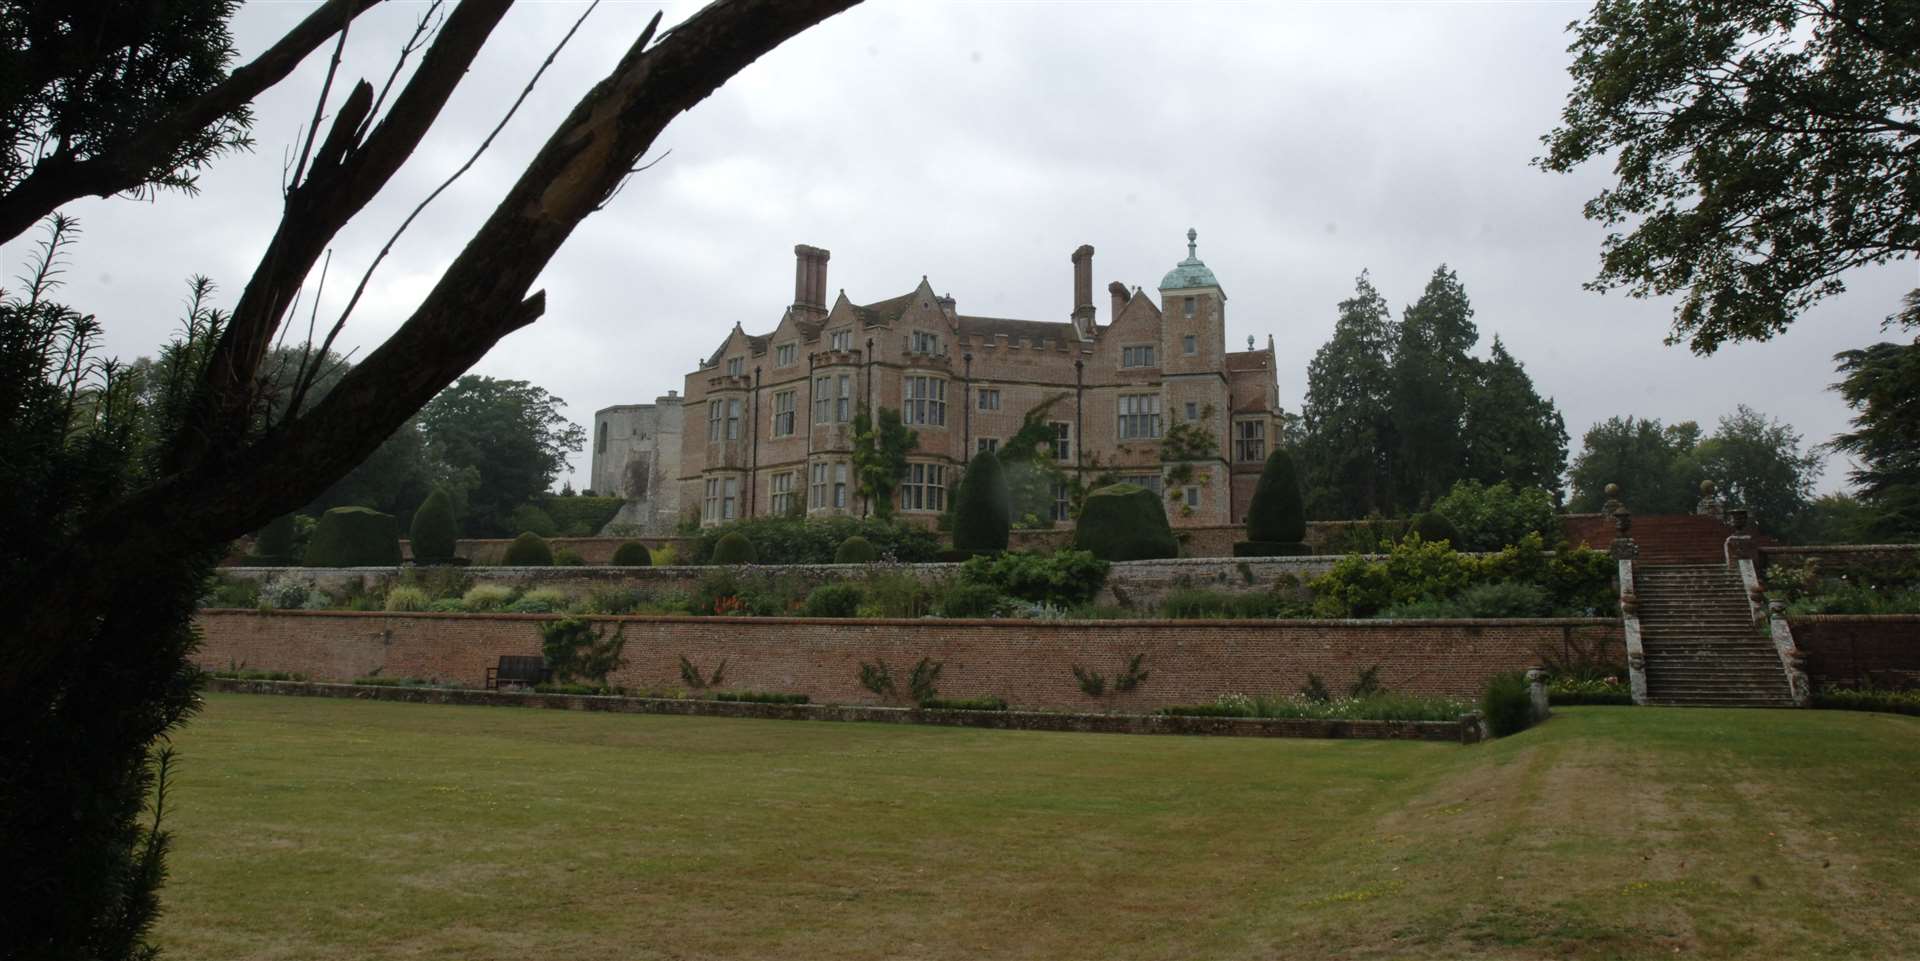 Situated between Ashford and Canterbury, Chilham Castle is said to have been built for King Henry II.